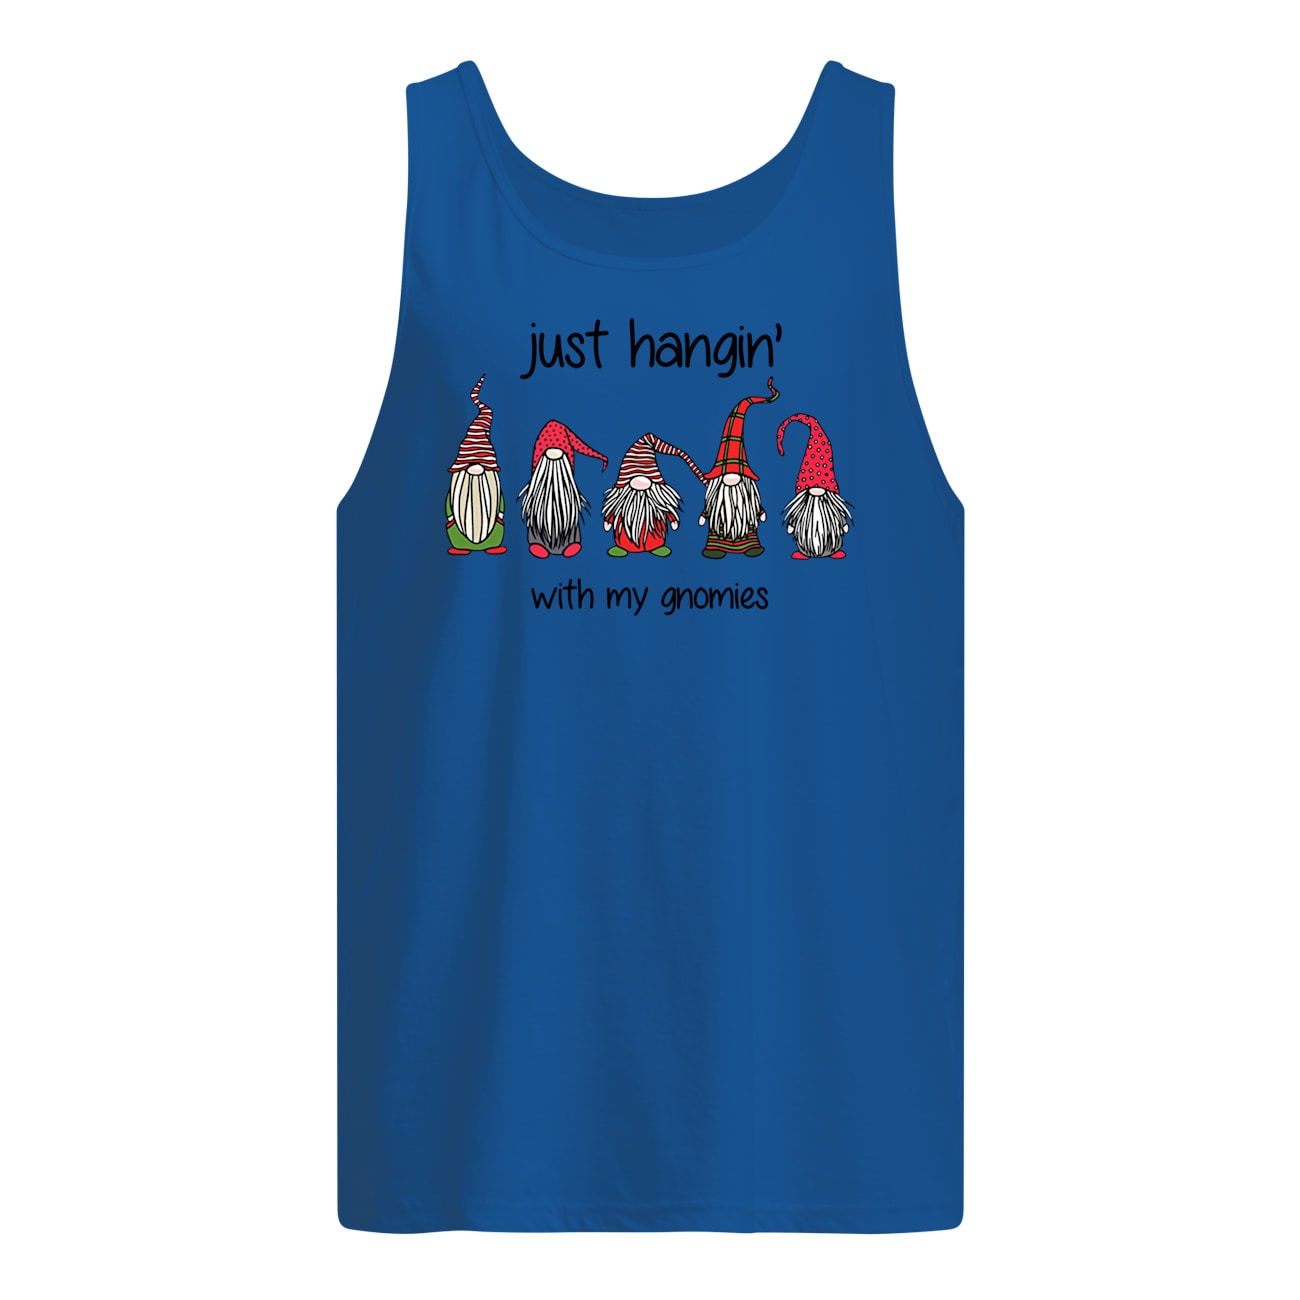 Just hangin with my gnomies christmas tank top